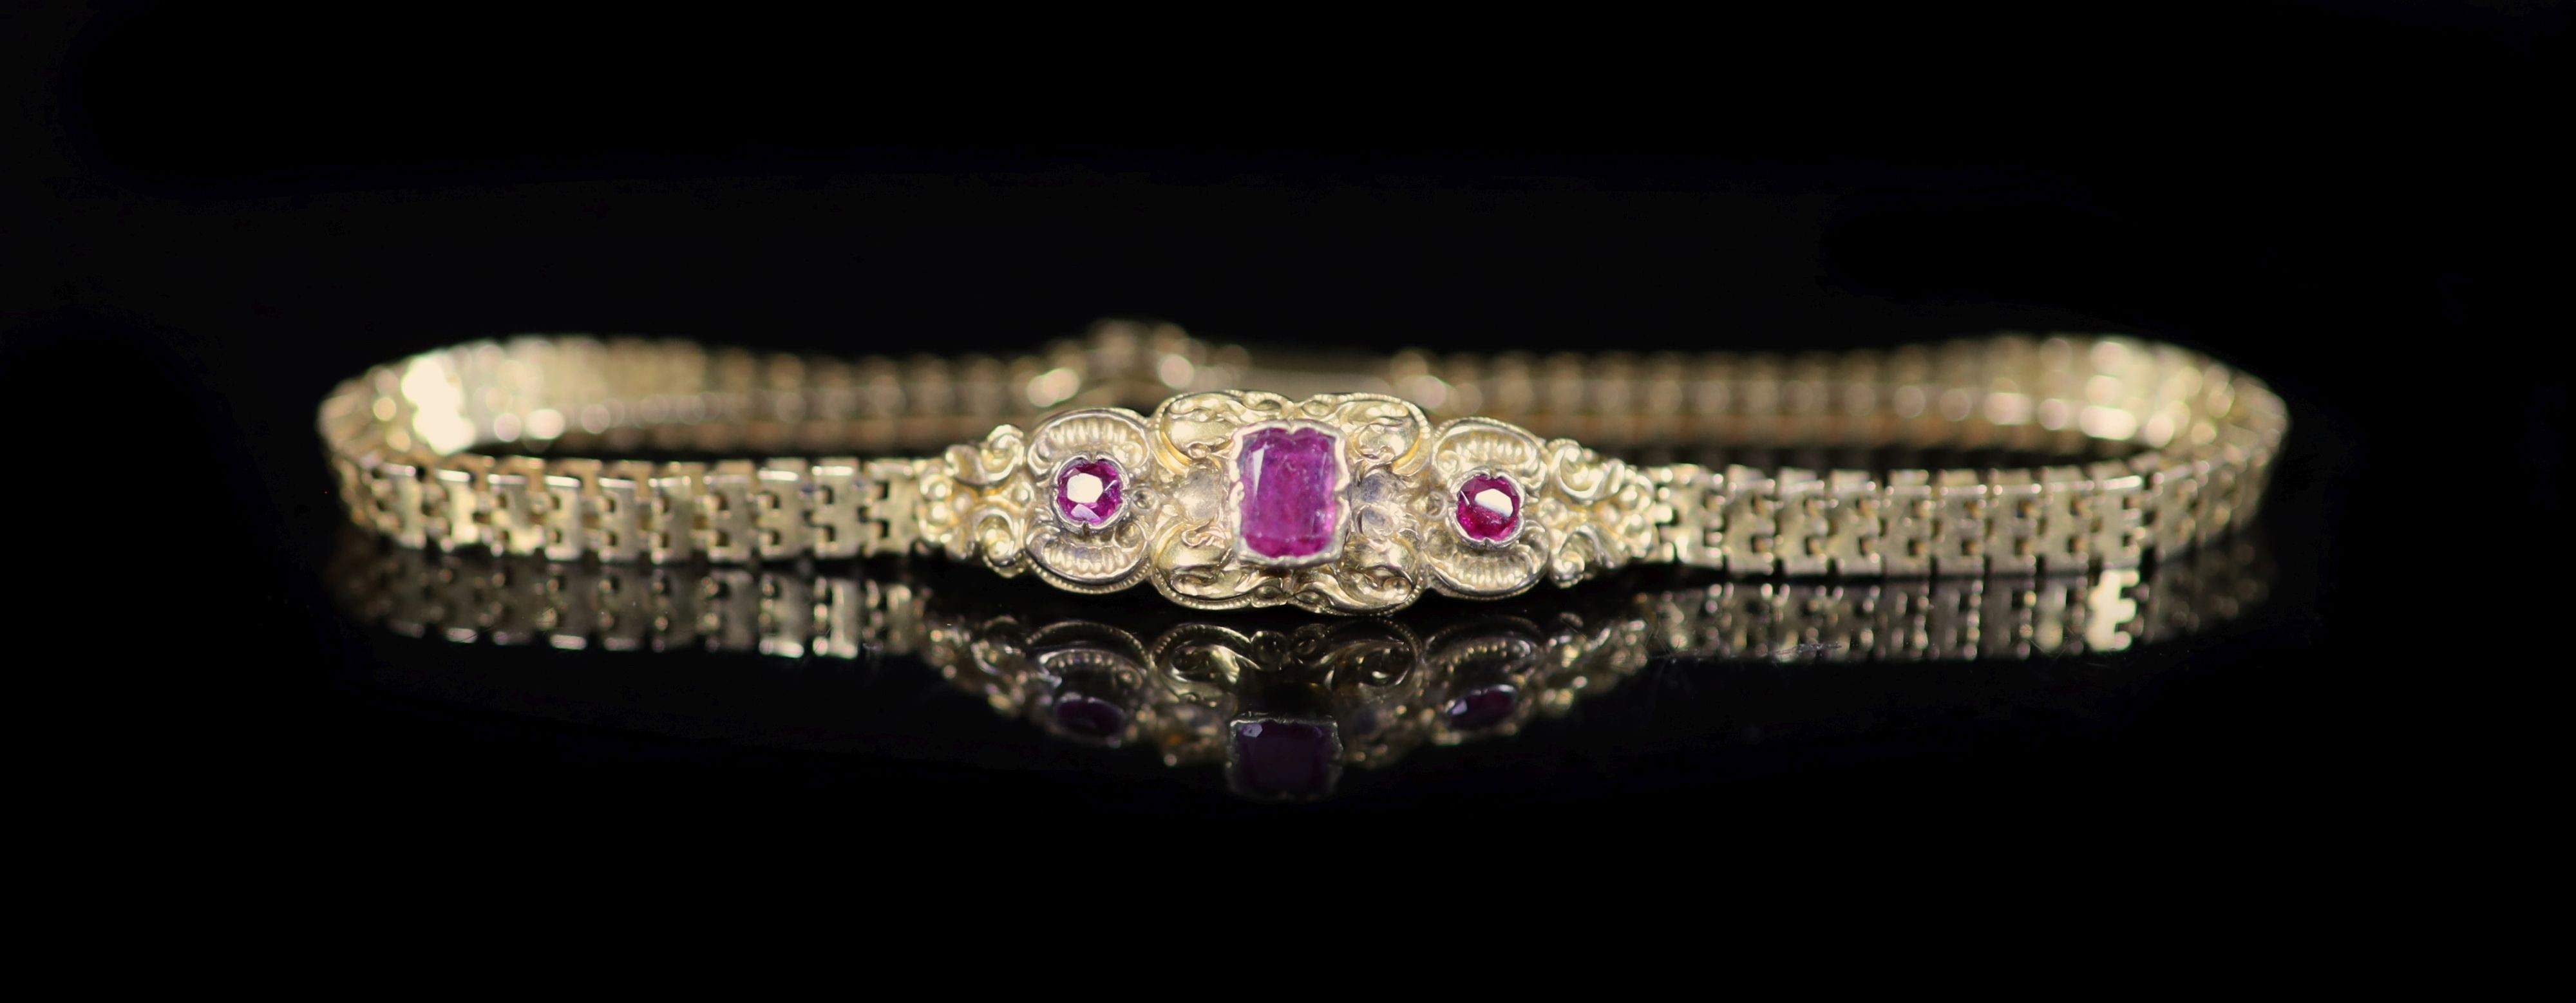 A 19th century French gold and three stone gem set bracelet